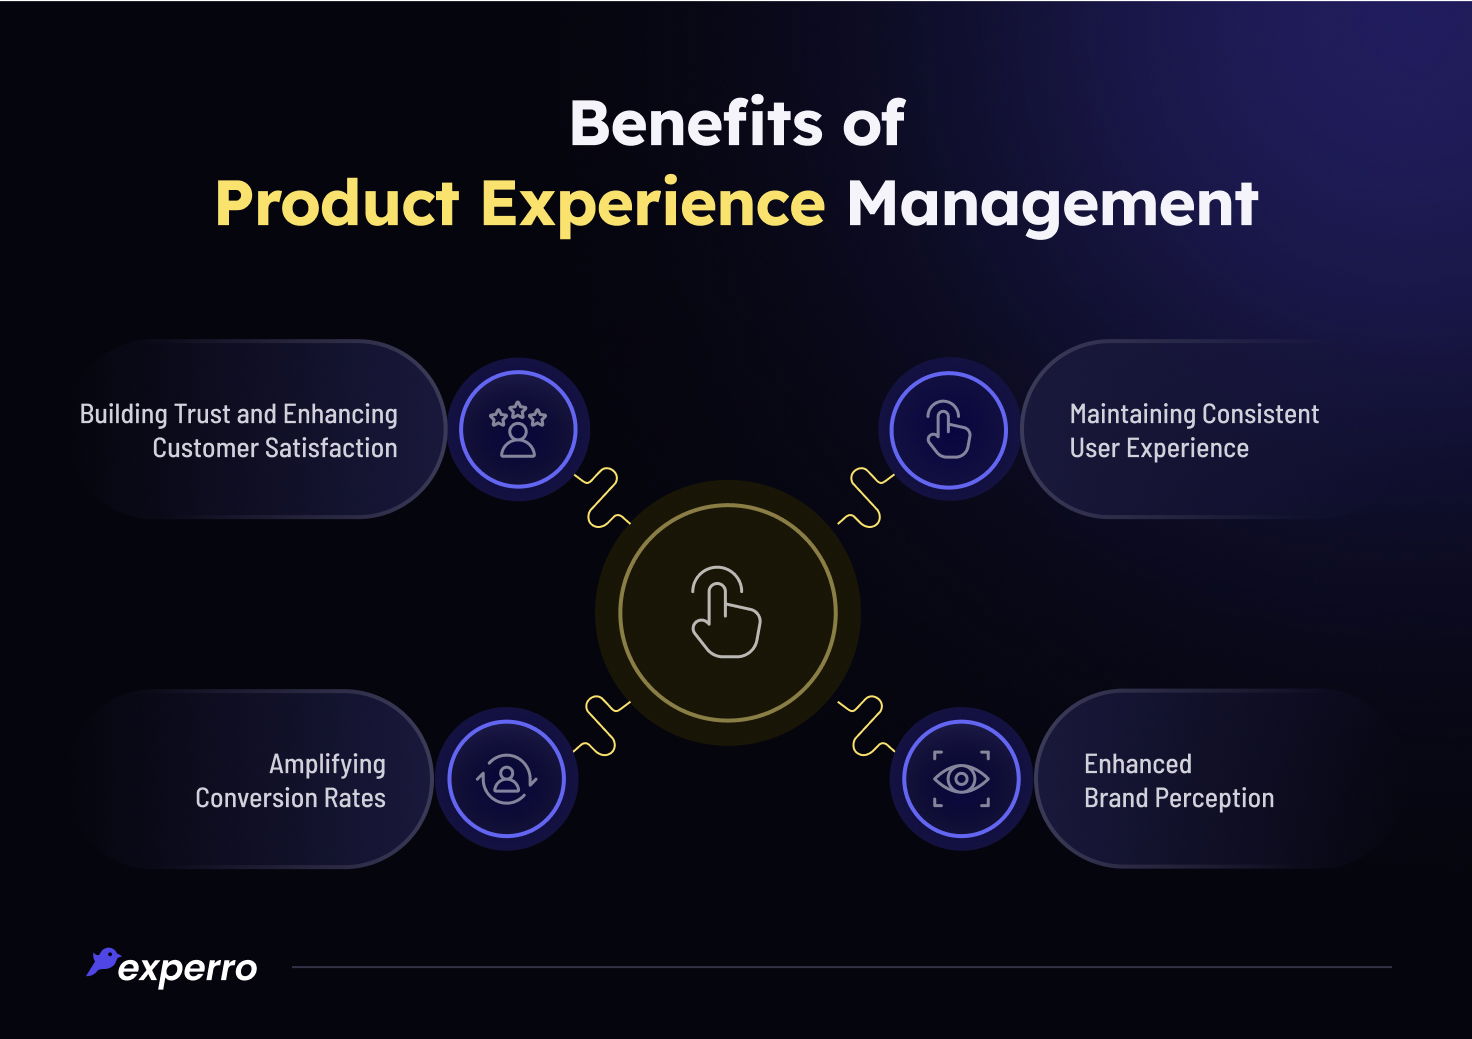 Benefits of Product Experience Management